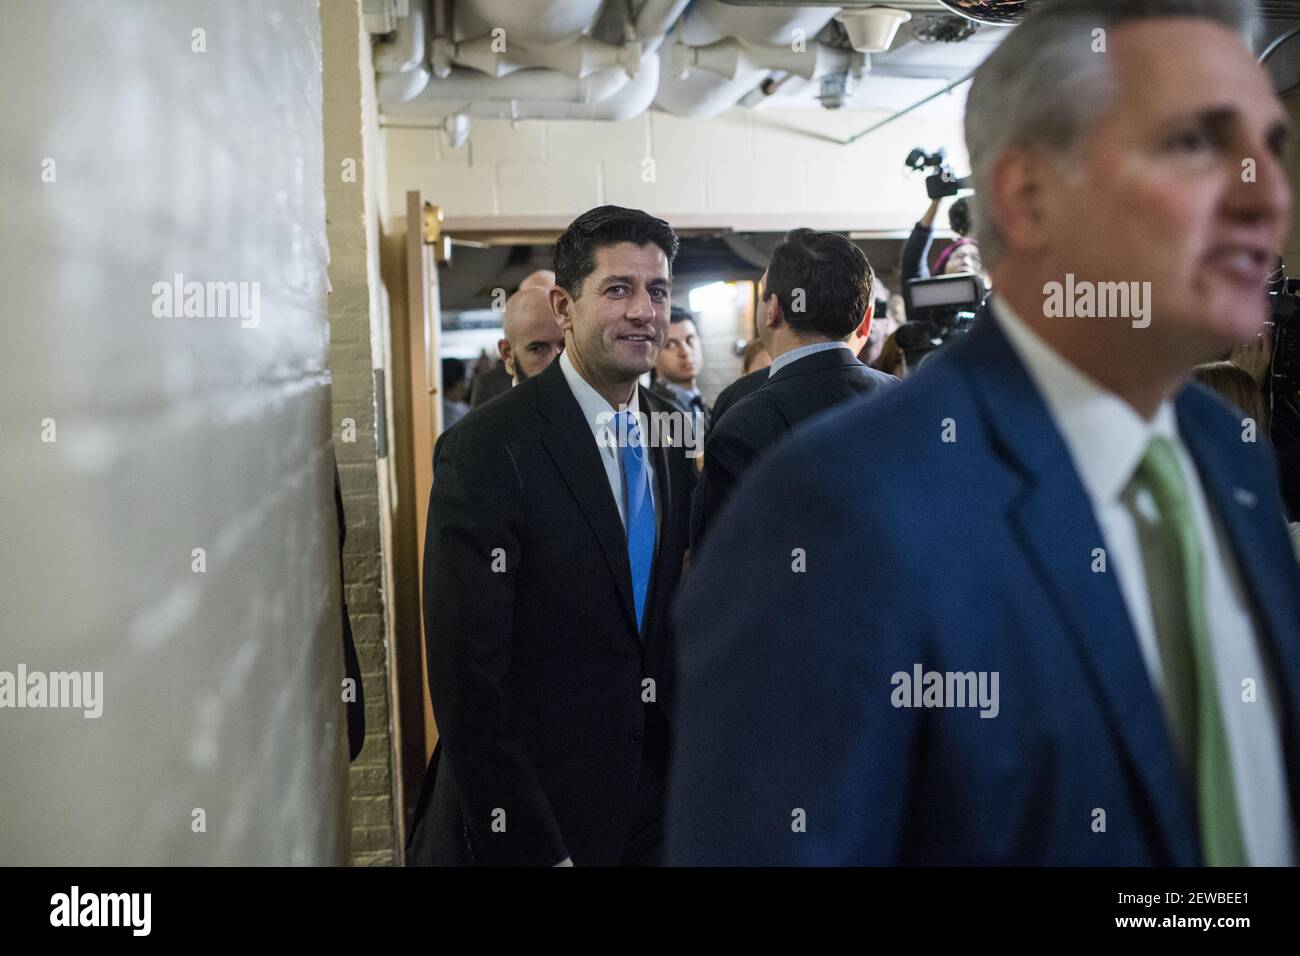 UNITED STATES - DECEMBER 19: Speaker Paul Ryan, R-Wis., left, and House Majority Leader Kevin McCarthy, R-Calif., are seen outside a meeting of the House Republican Conference in the Capitol on December 19, 2017. (Photo By Tom Williams/CQ Roll Call) Stock Photo